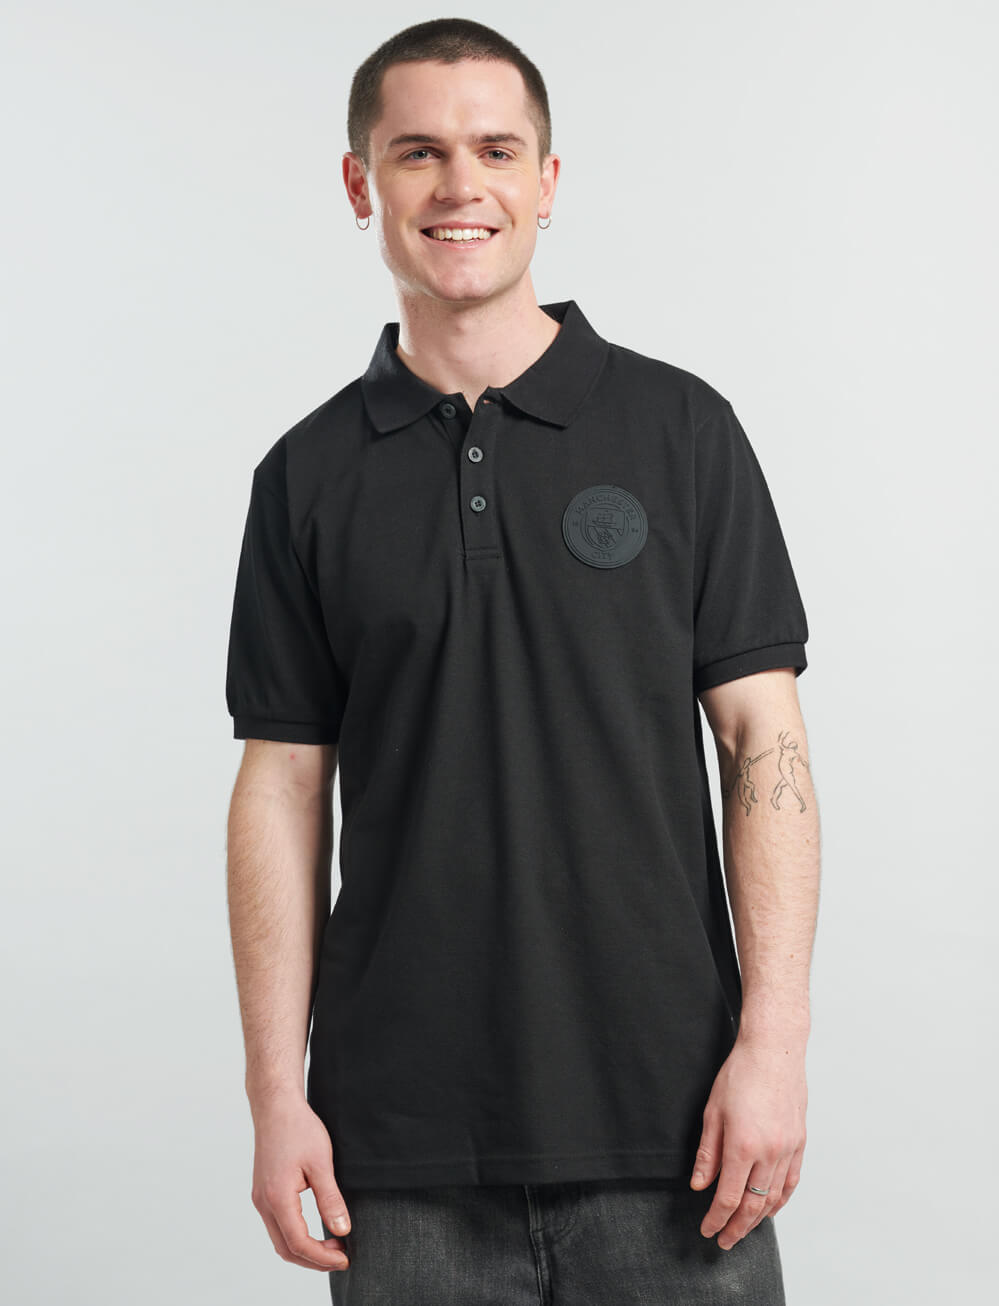 Official Manchester City Polo - Black - The World Football Store